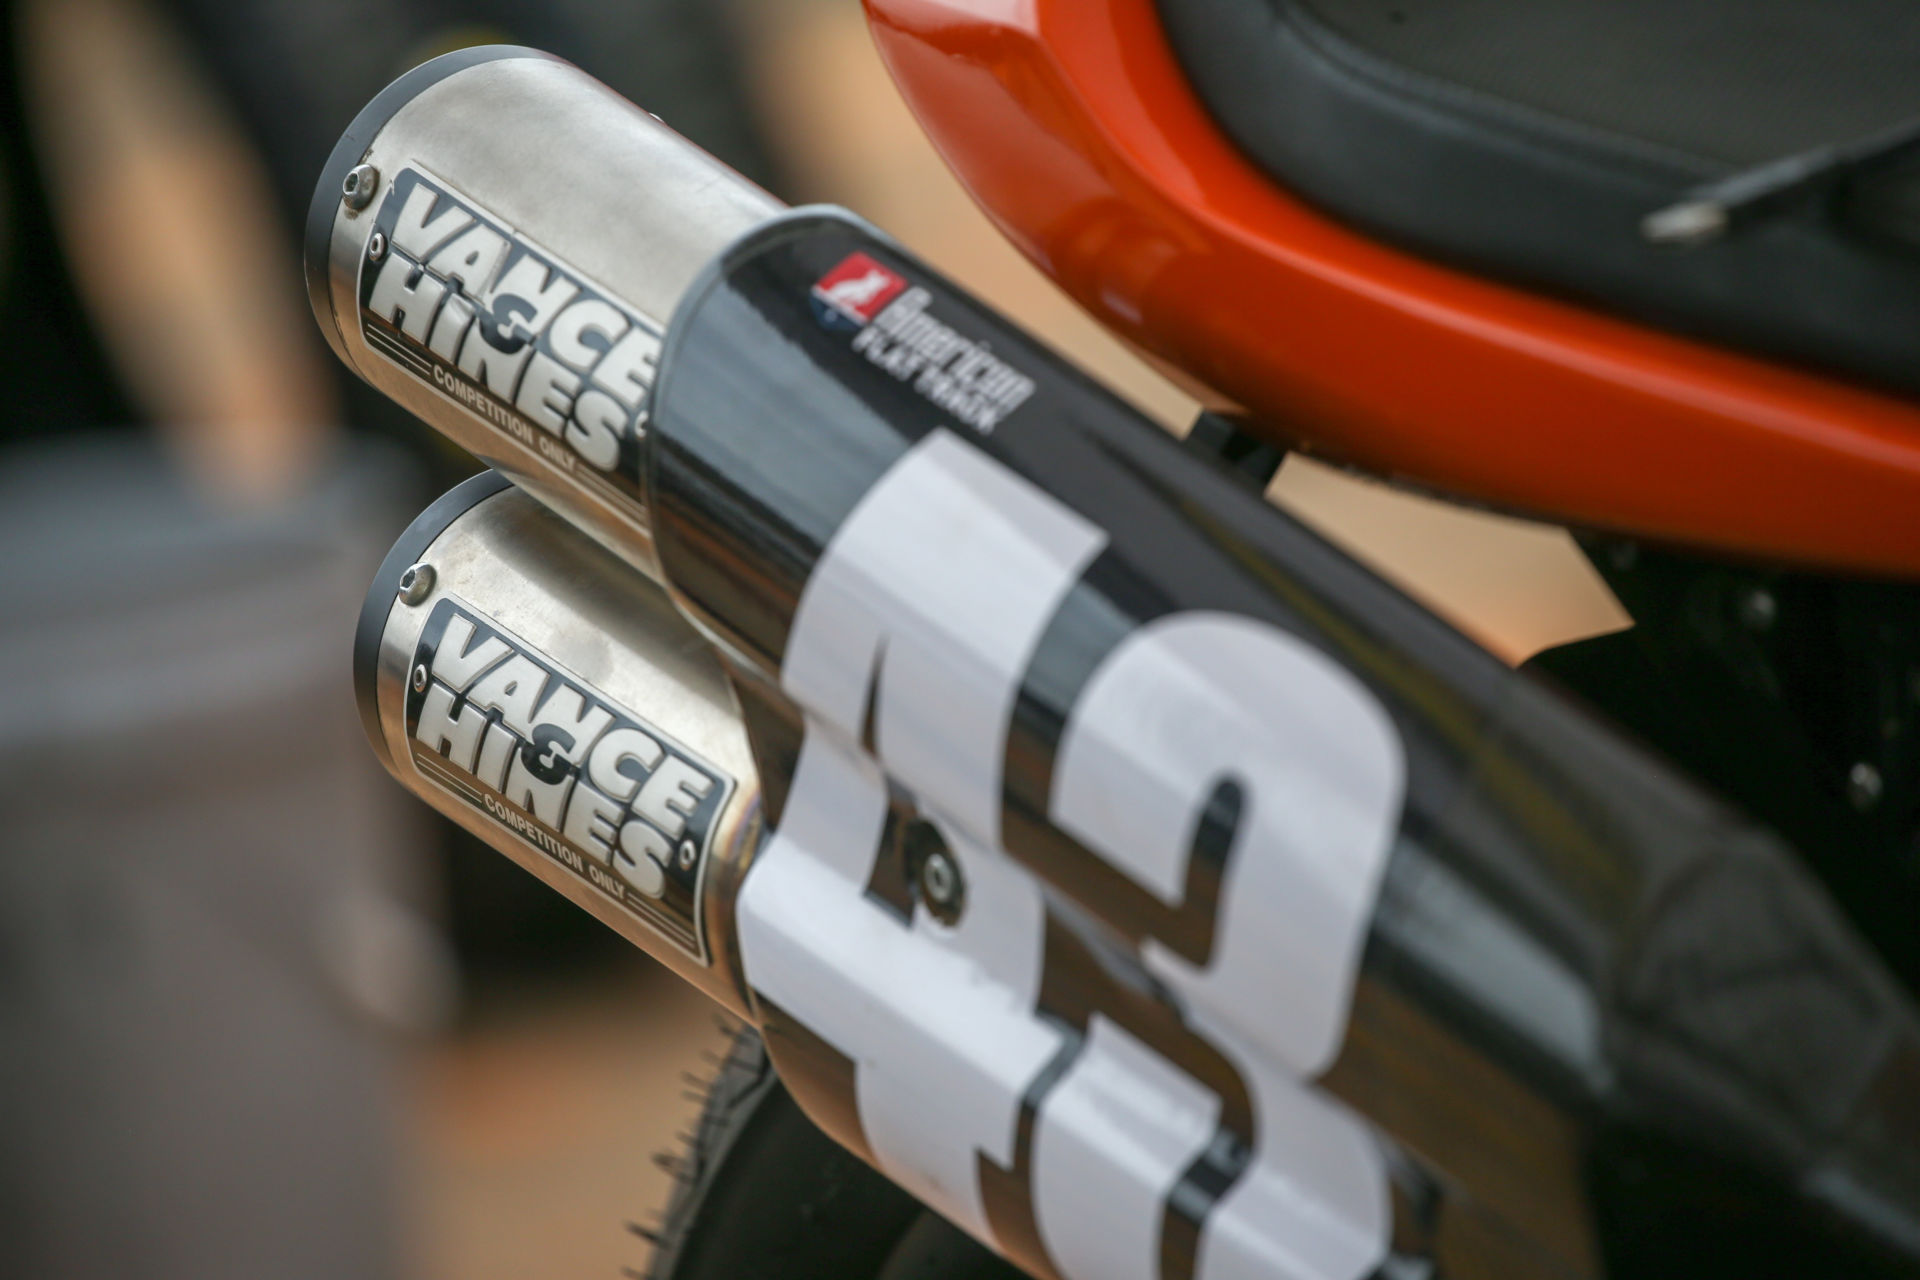 Aftermarket motorcycle exhaust system manufacturer Vance & Hines is the presenting sponsor of the 2021 American Flat Track (AFT) Production Twins Championship. Photo by Scott Hunter, courtesy AFT.